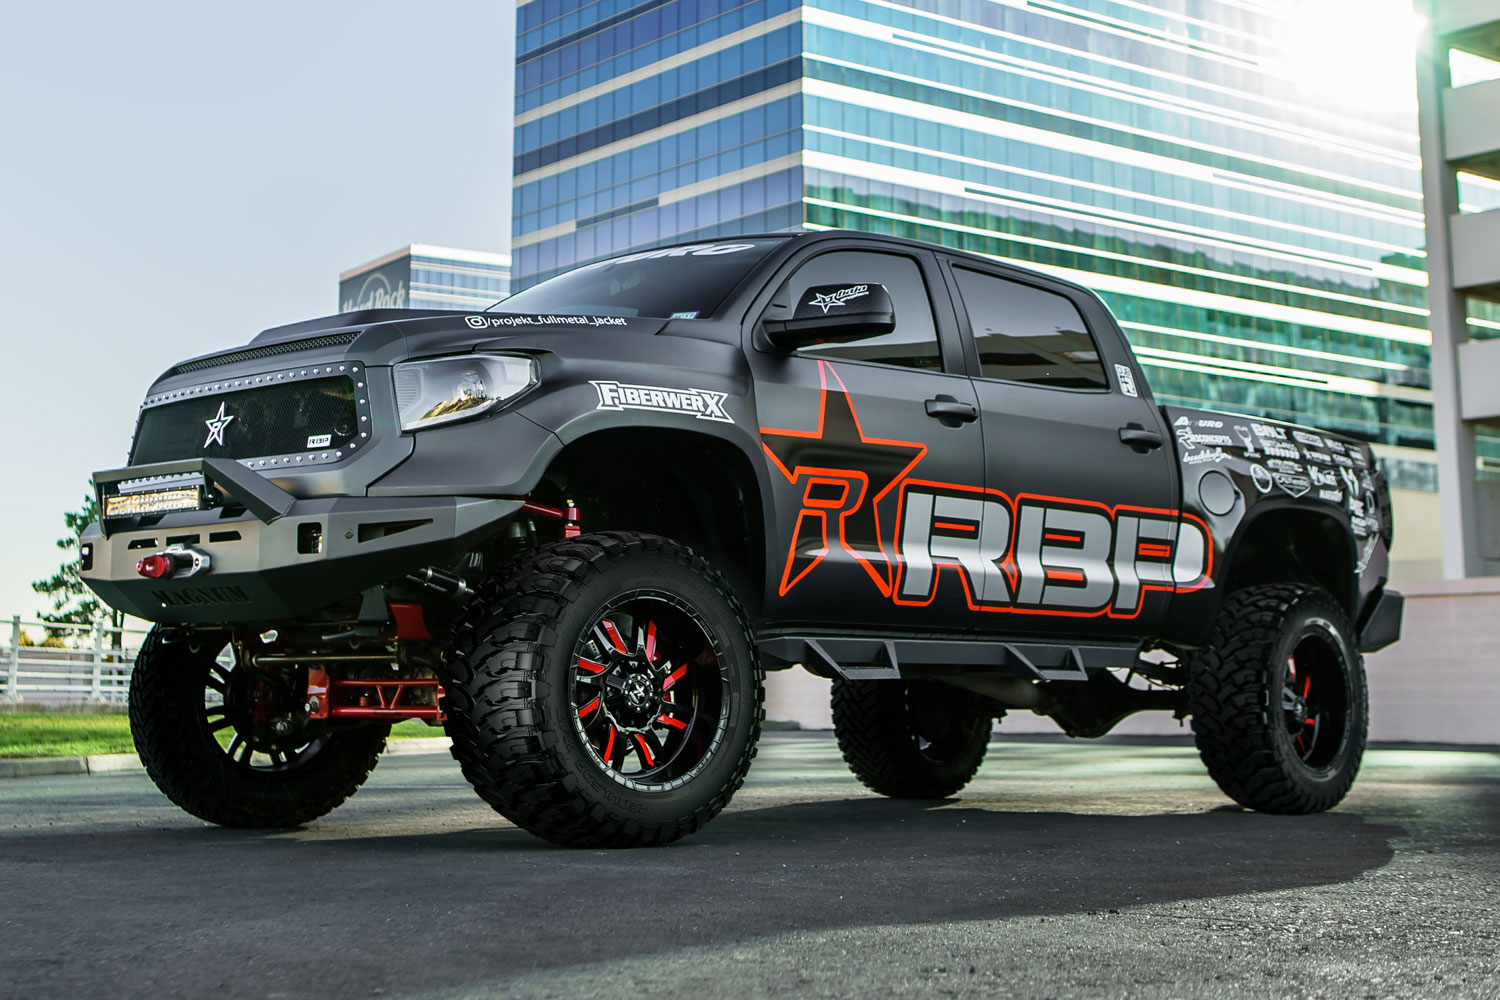 An image of a Matte Wrapped Toyota TUndra on RBP Repulsor M/T tires